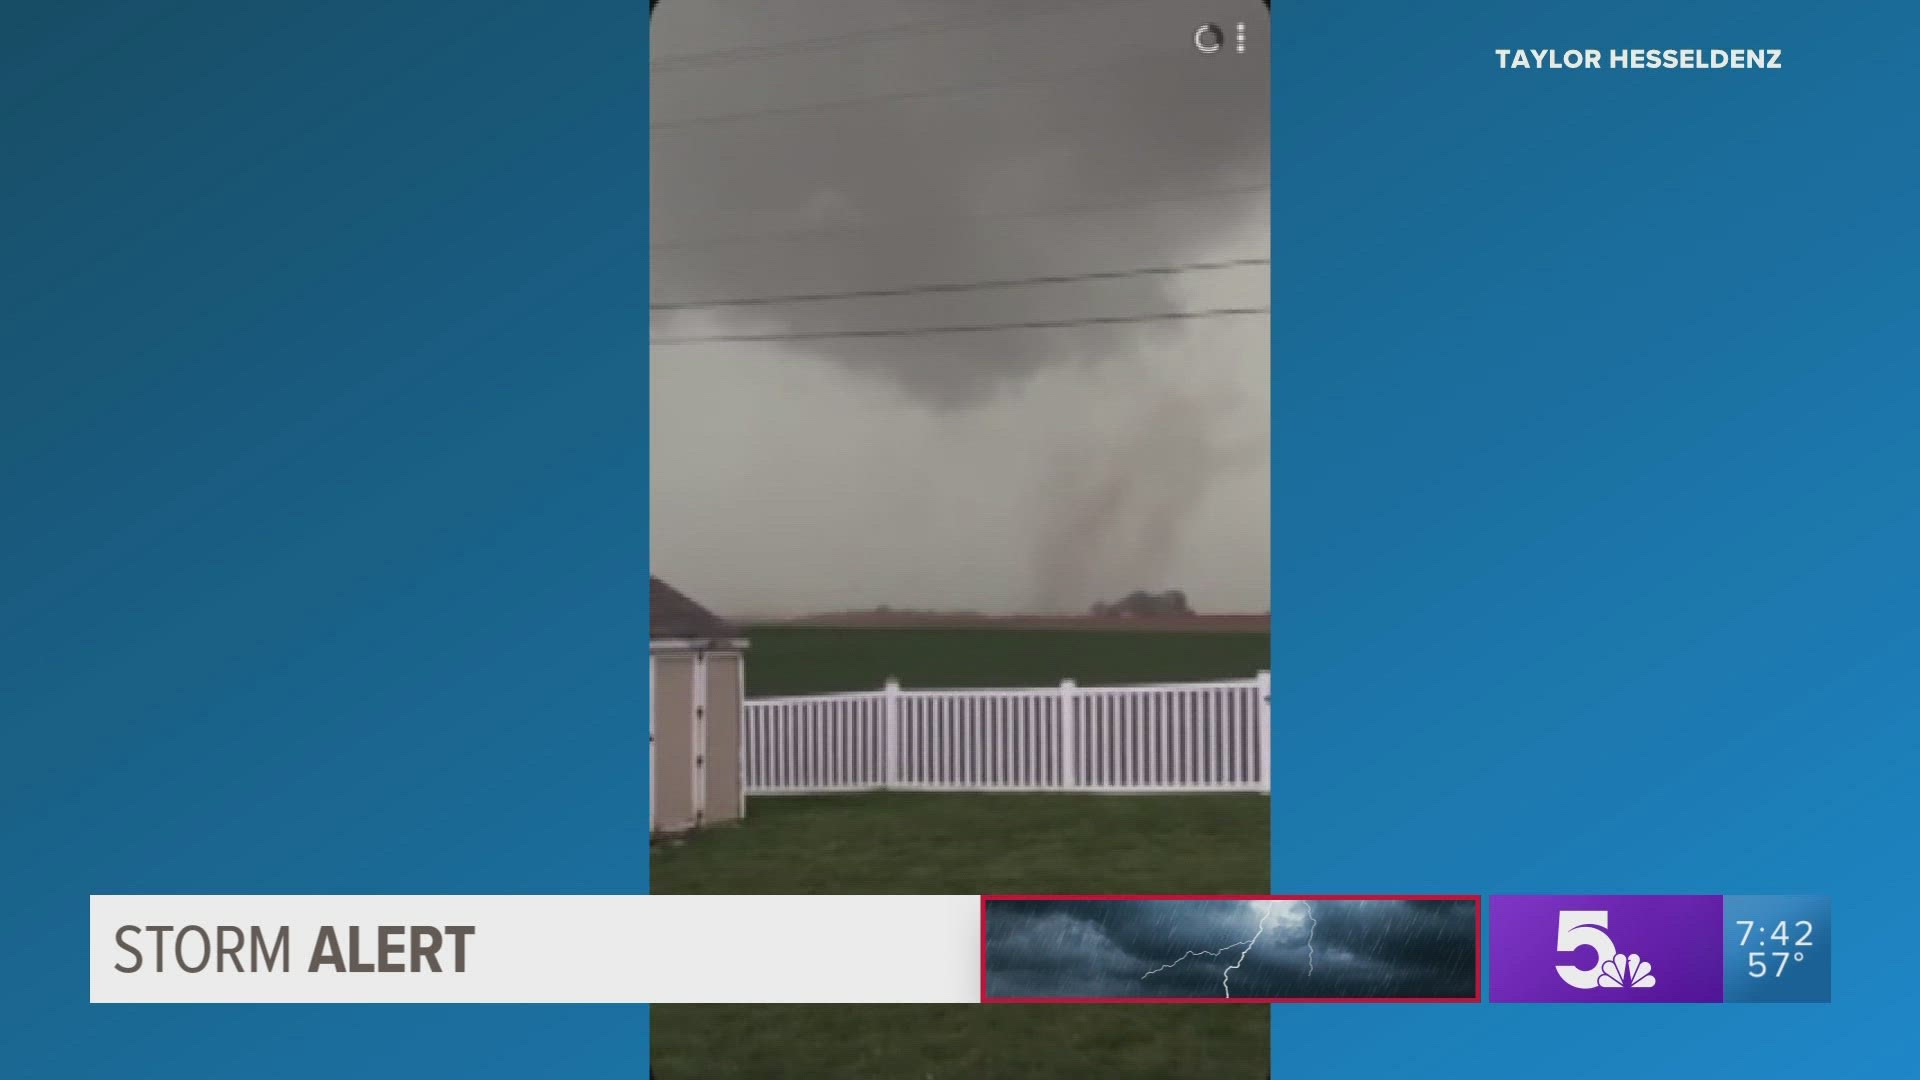 Video appears to confirm a tornado touchdown in Waterloo, Illinois. This was from a viewer in St. Clair County.